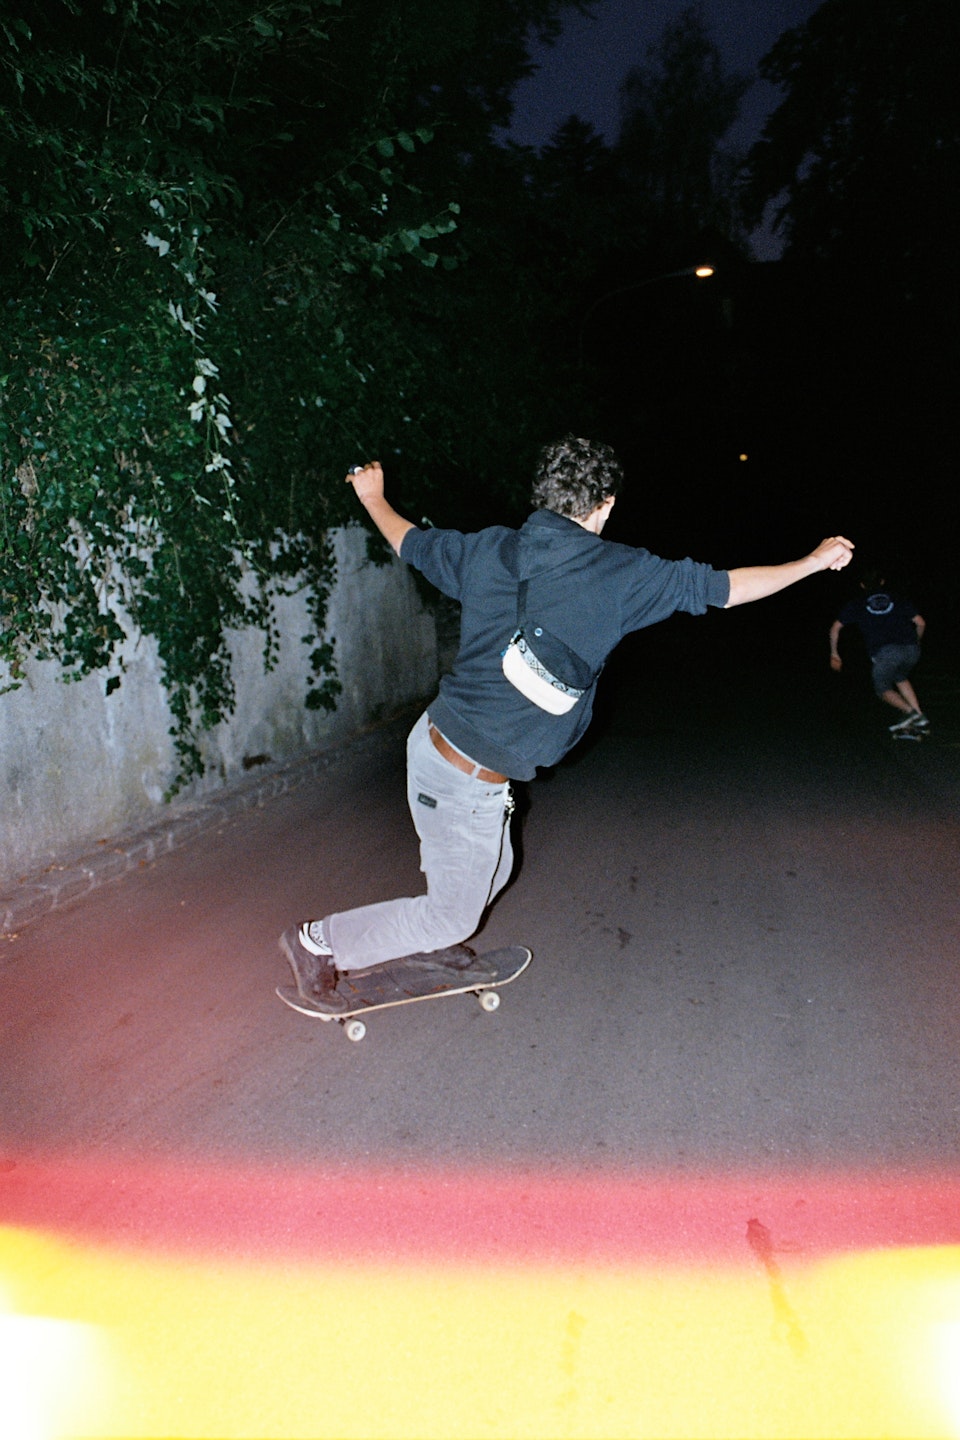 FabioStecher_Hillbomb_Nightride_2020_RigiblickZH - WHAT IS THE SERIES ABOUT:

This is a NFT series created spontaneously during a skatesession in Zurich. 
The series consists of a series of raw, unedited analog photos.
I shot the series whilst bombing the Hill with those local skaters. 
This is a rare NFT that gives an insight in the Skatelife of locals in Zurich.